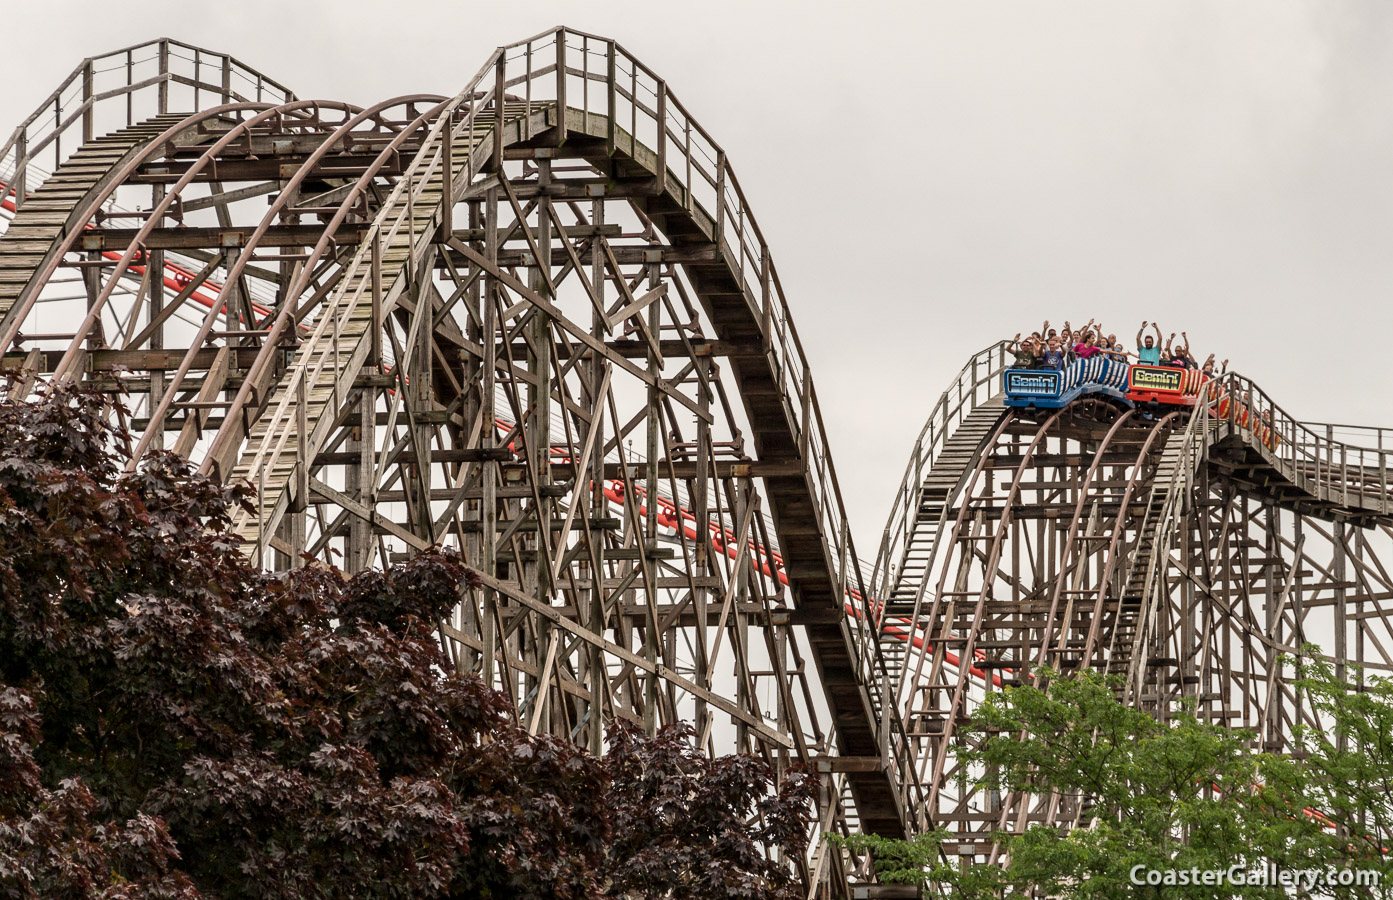 Images of the Gemini racing roller coaster